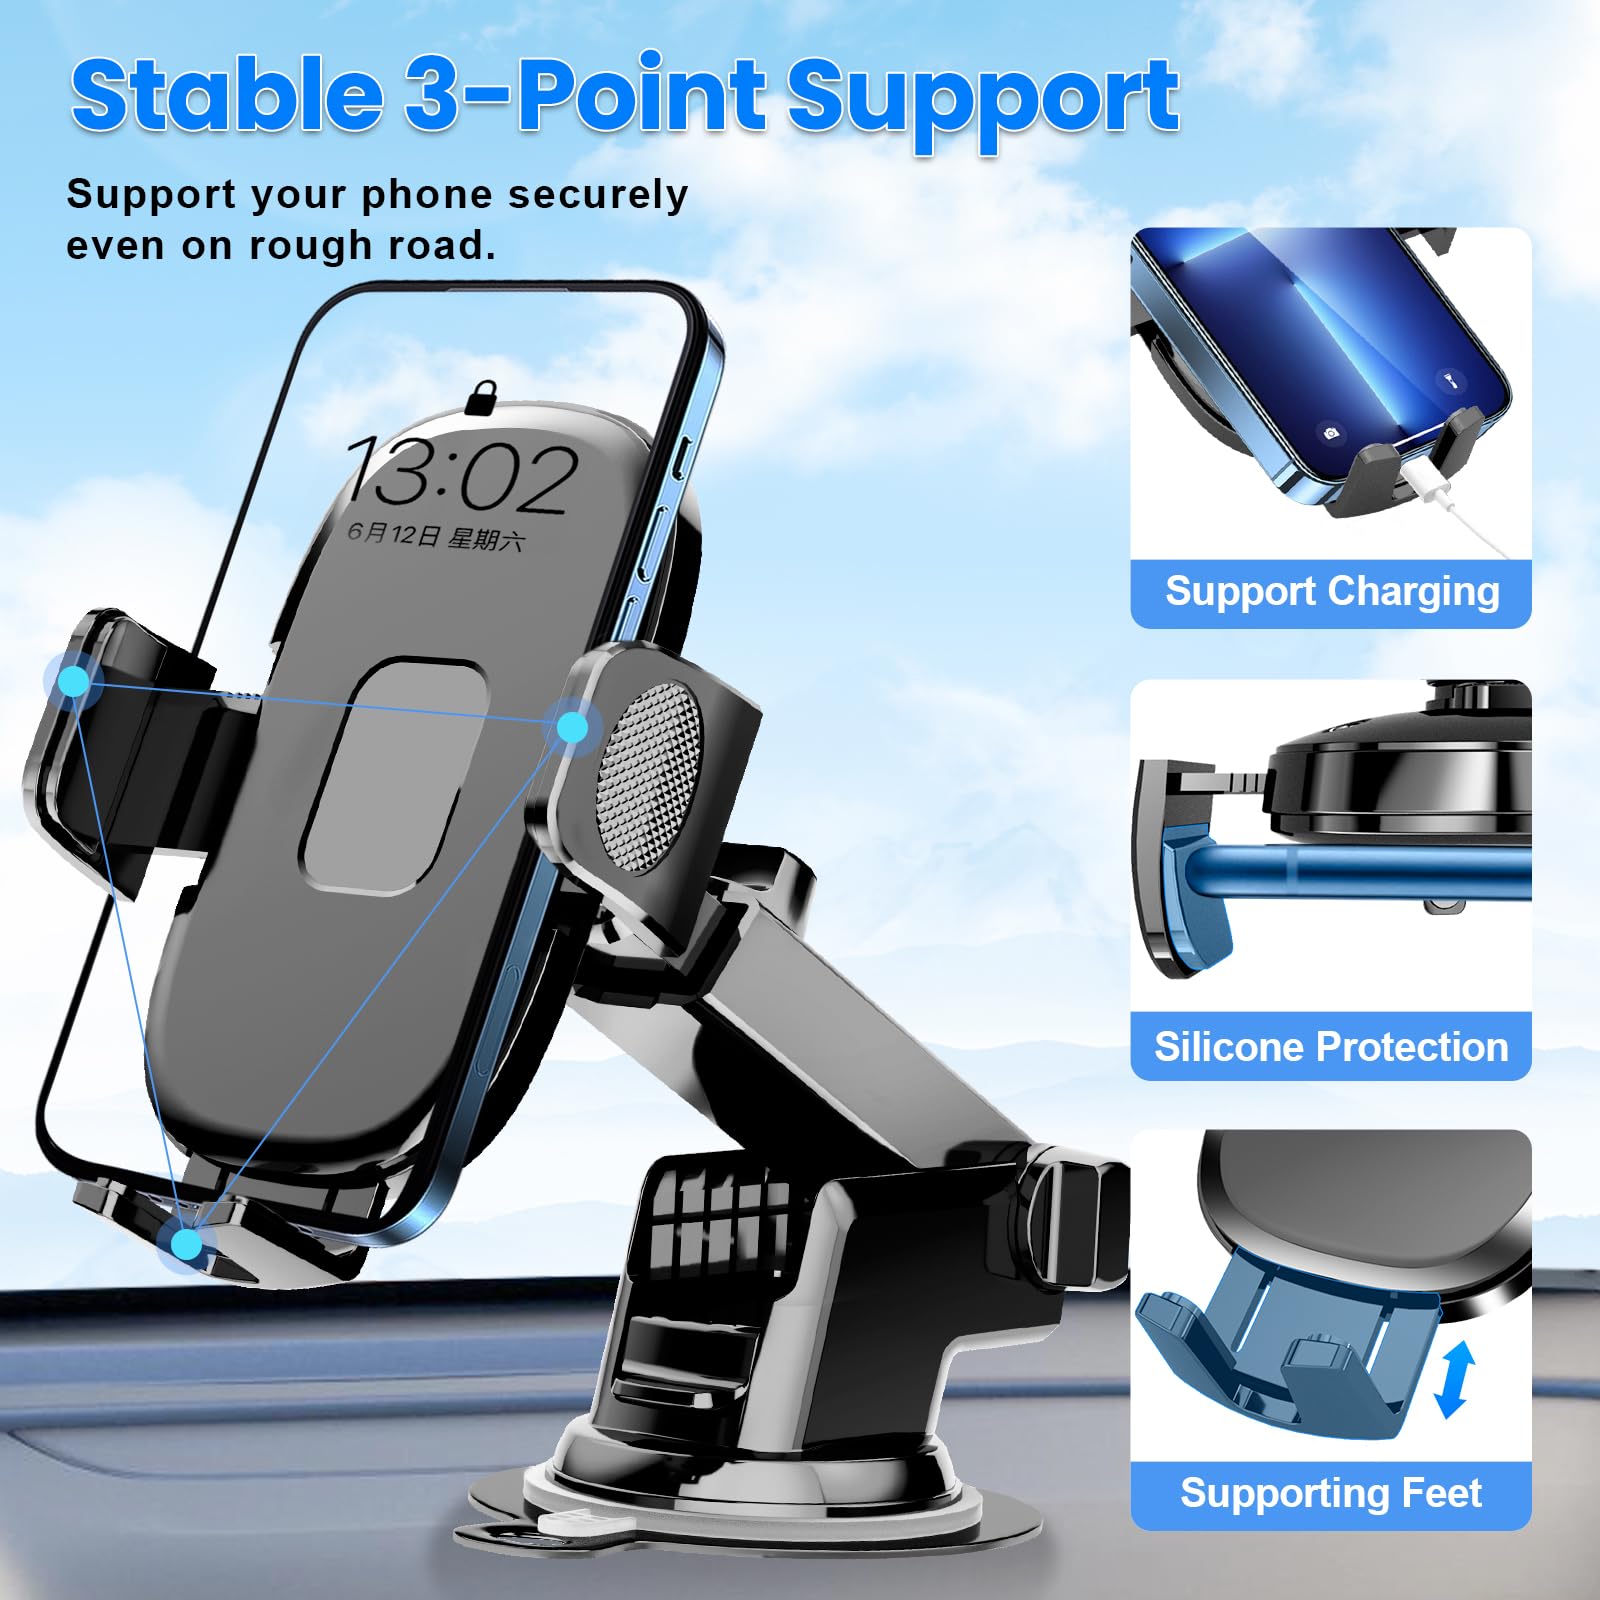 TAPMEI Car Phone Holder [Military-Grade Suction Cup] Universal Phone Mount for Car Dashboard Windshield Fit for Smartphones (Black)